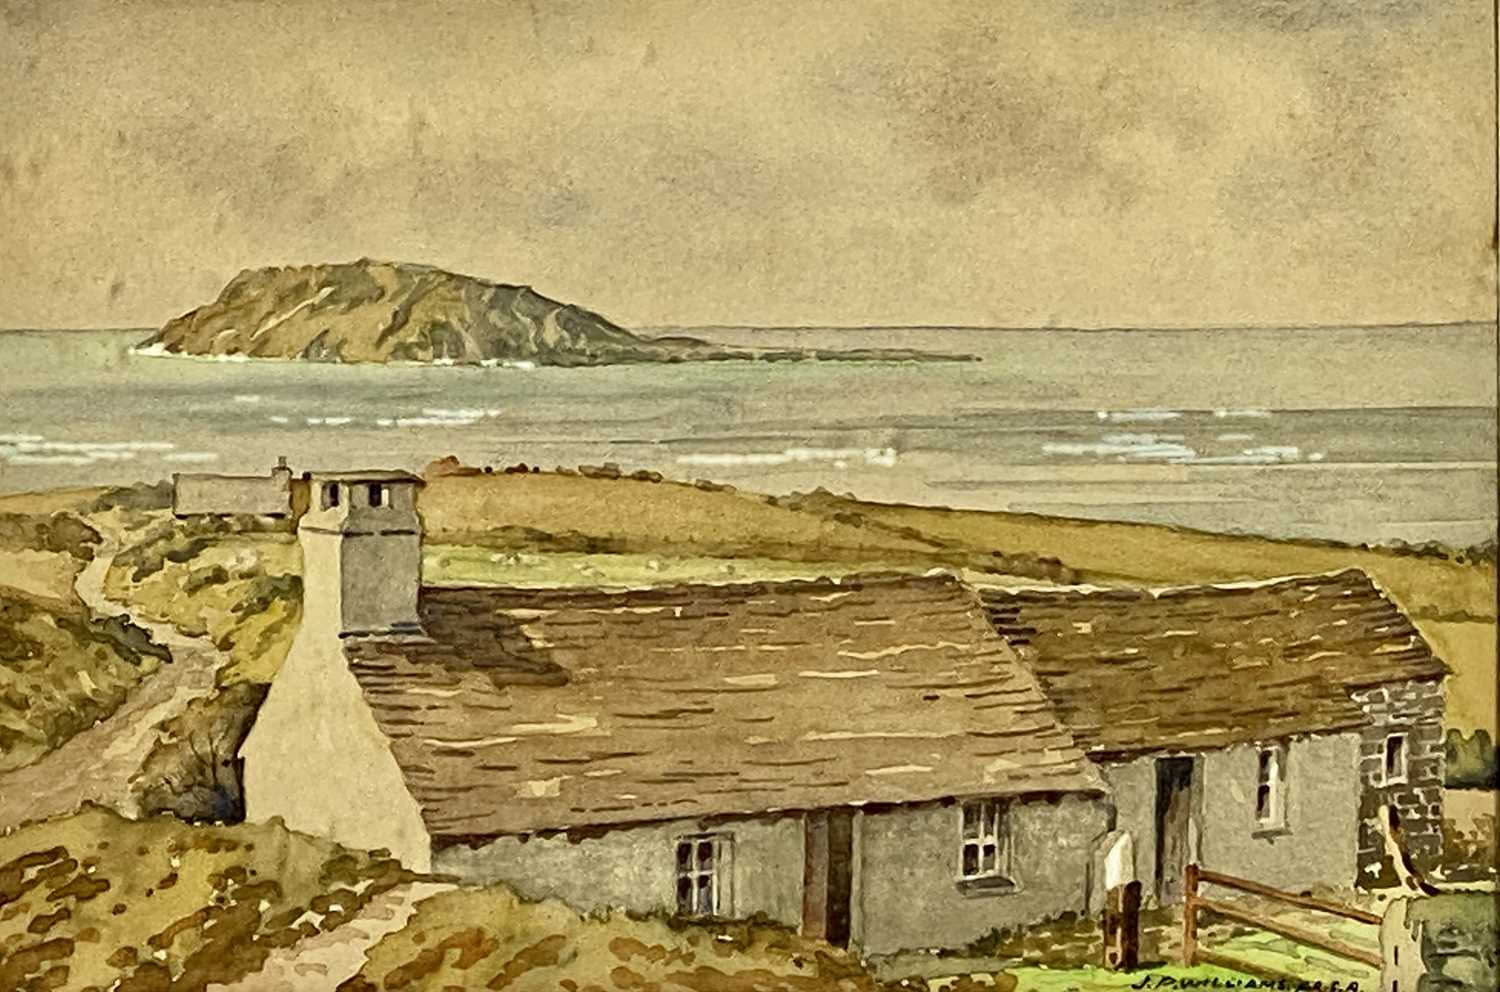 ‡ J. P. WILLIAMS F.R.S.A 20th century watercolour - entitled "Enlli" (Bardsey), signed lower right